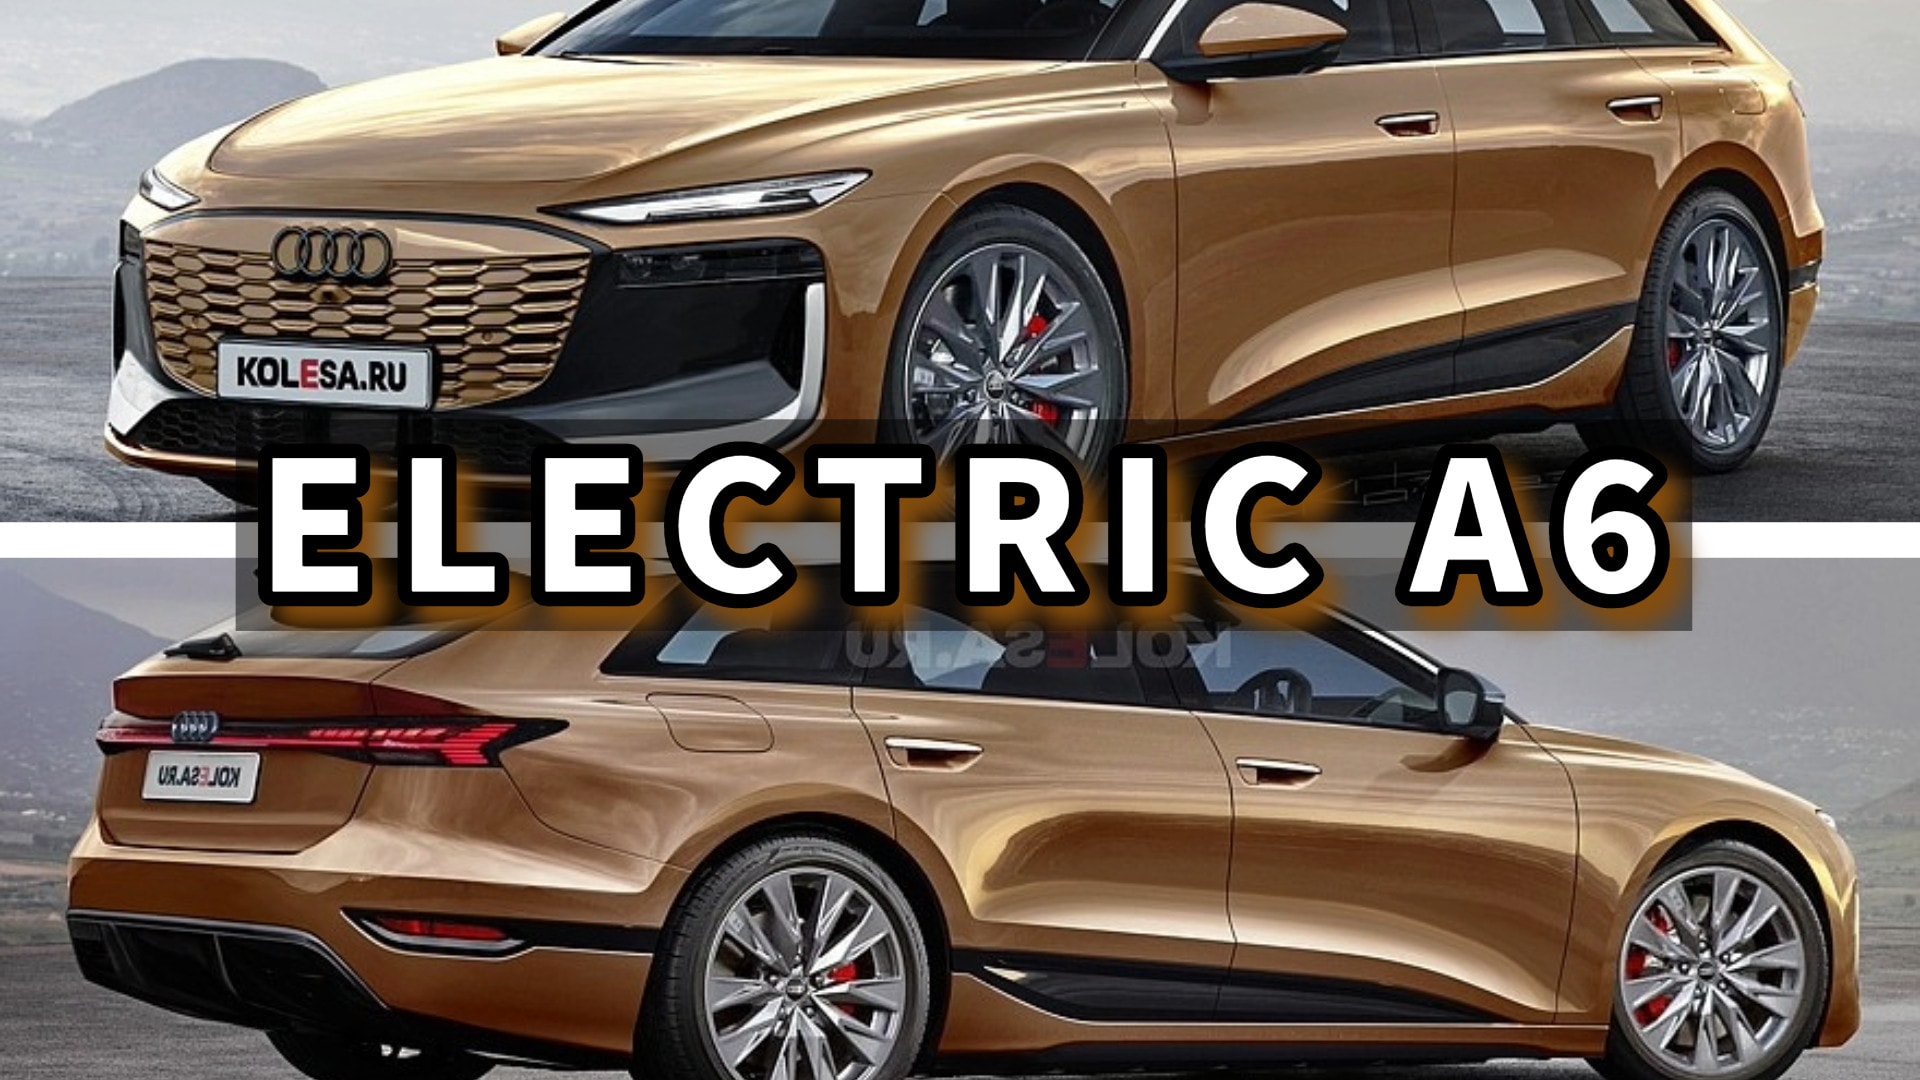 Audi on X: Premium and electric. The Audi A6 Avant e-tron concept brings  #Audi closer to expanding their range and having more than 20 fully  #electric models in their portfolio by 2025.